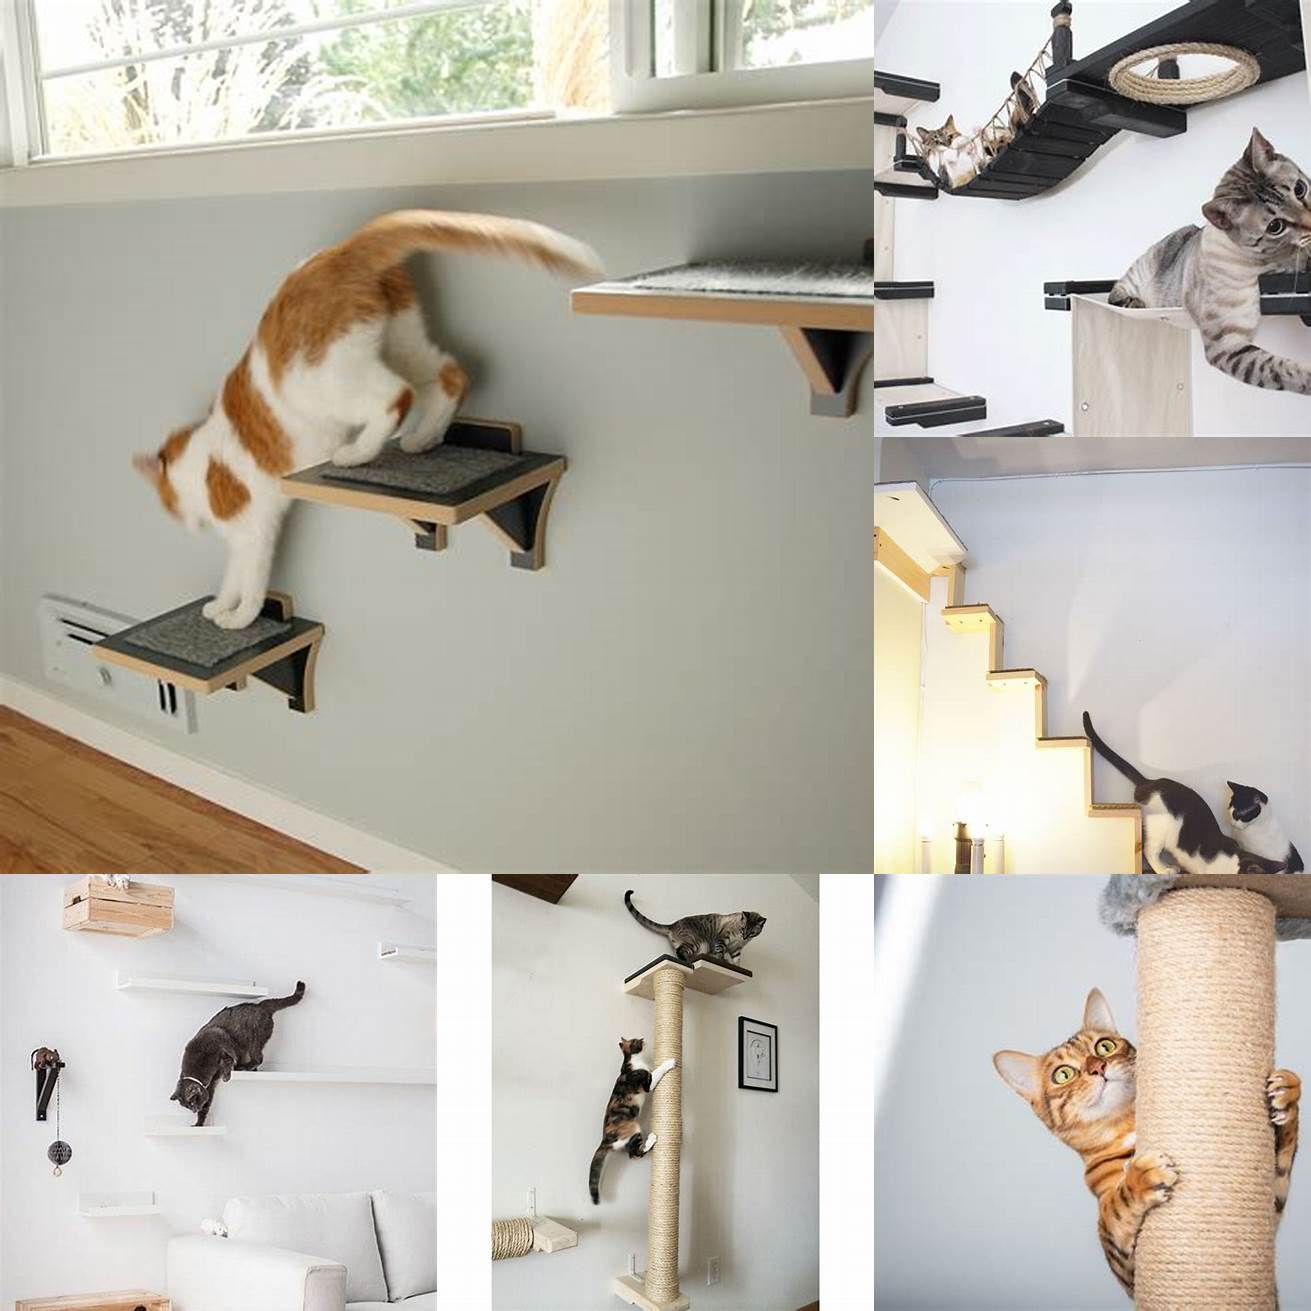 Provide safe climbing options - Cats love to climb so provide them with safe climbing options